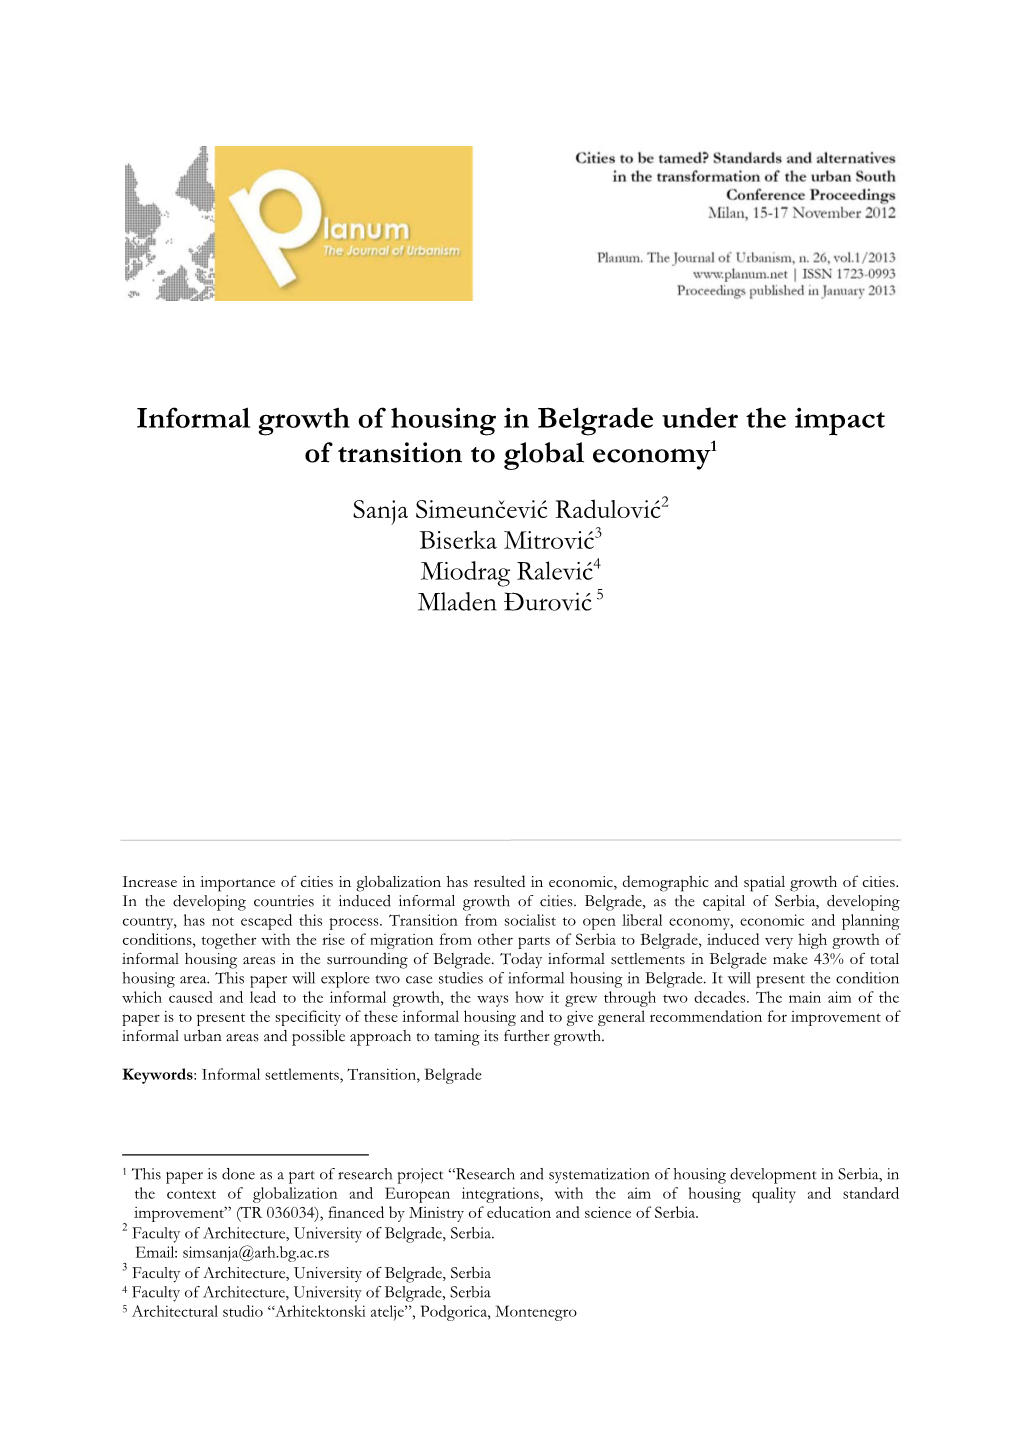 Informal Growth of Housing in Belgrade Under the Impact of Transition to Global Economy1